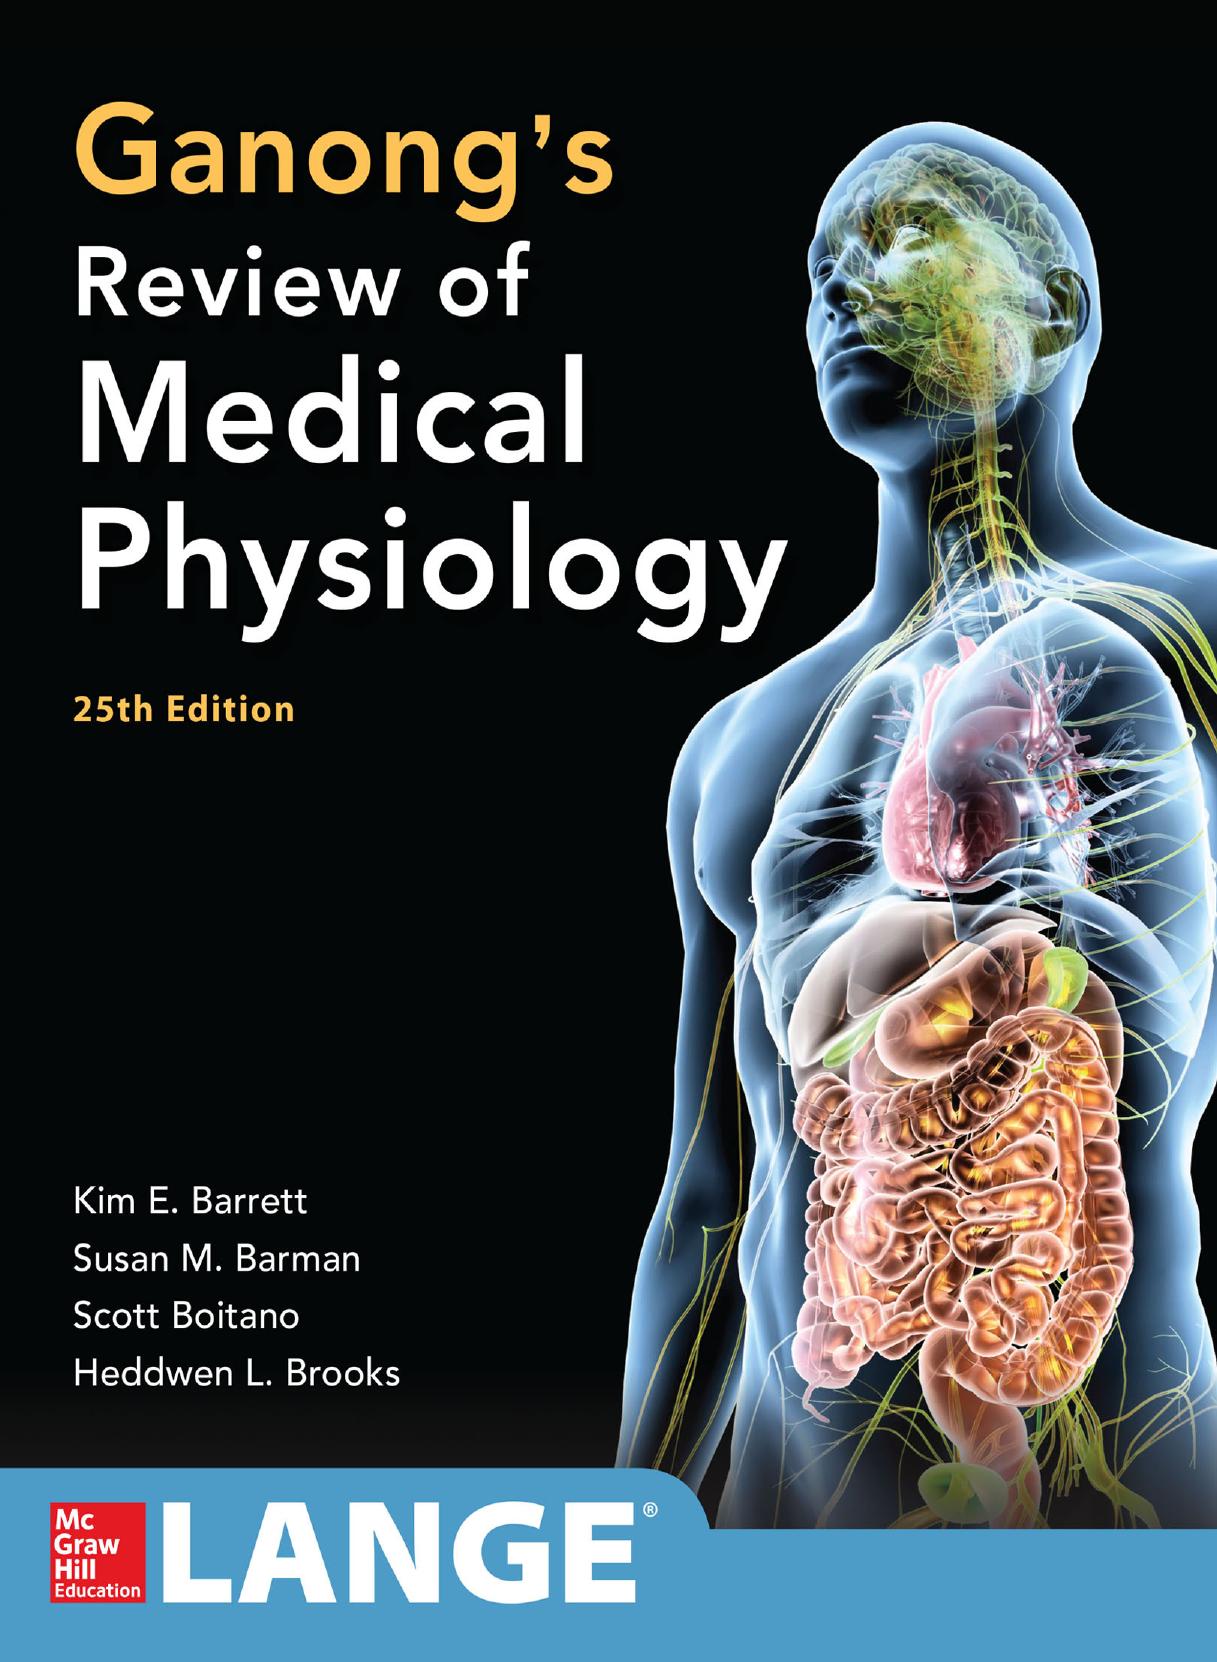 Ganong's Review of Medical Physiology, 25th Edition